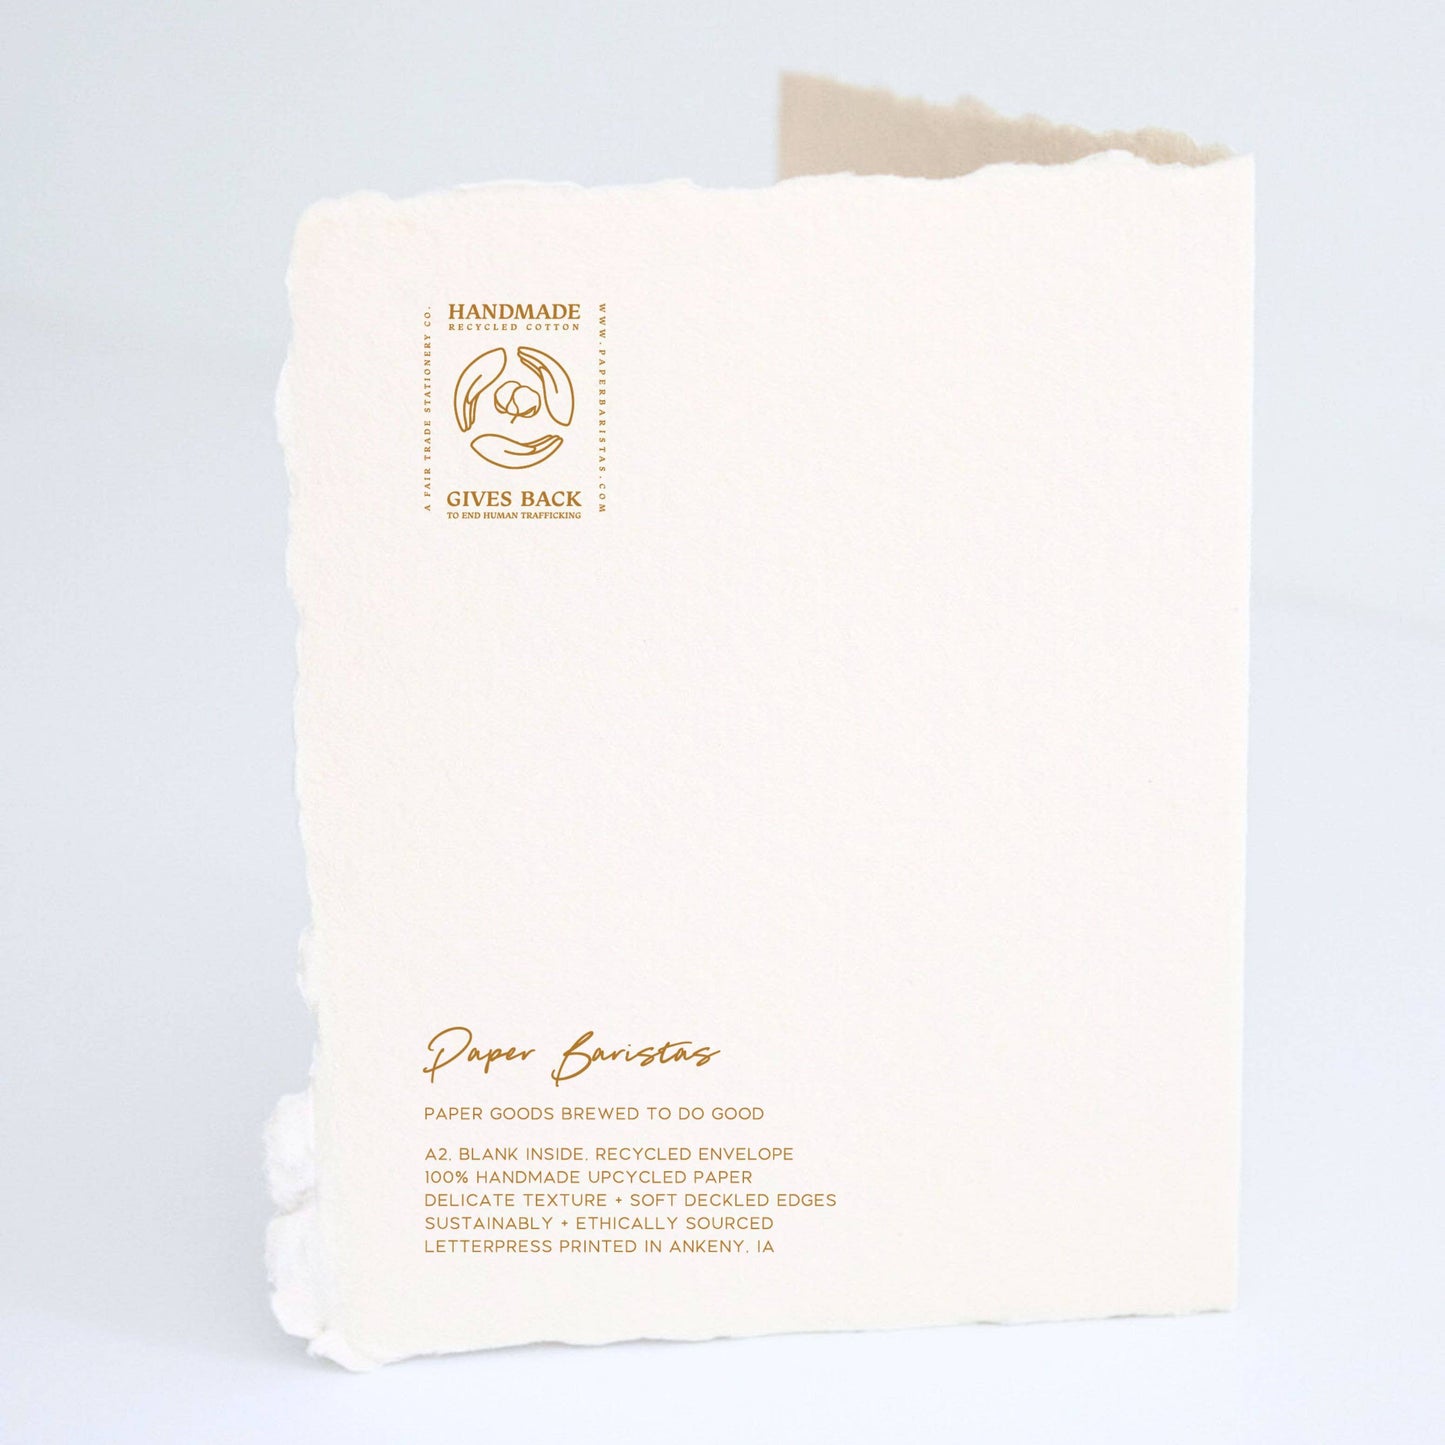 Paper Baristas - For the Lovebirds | Eco-Friendly Wedding Greeting Card